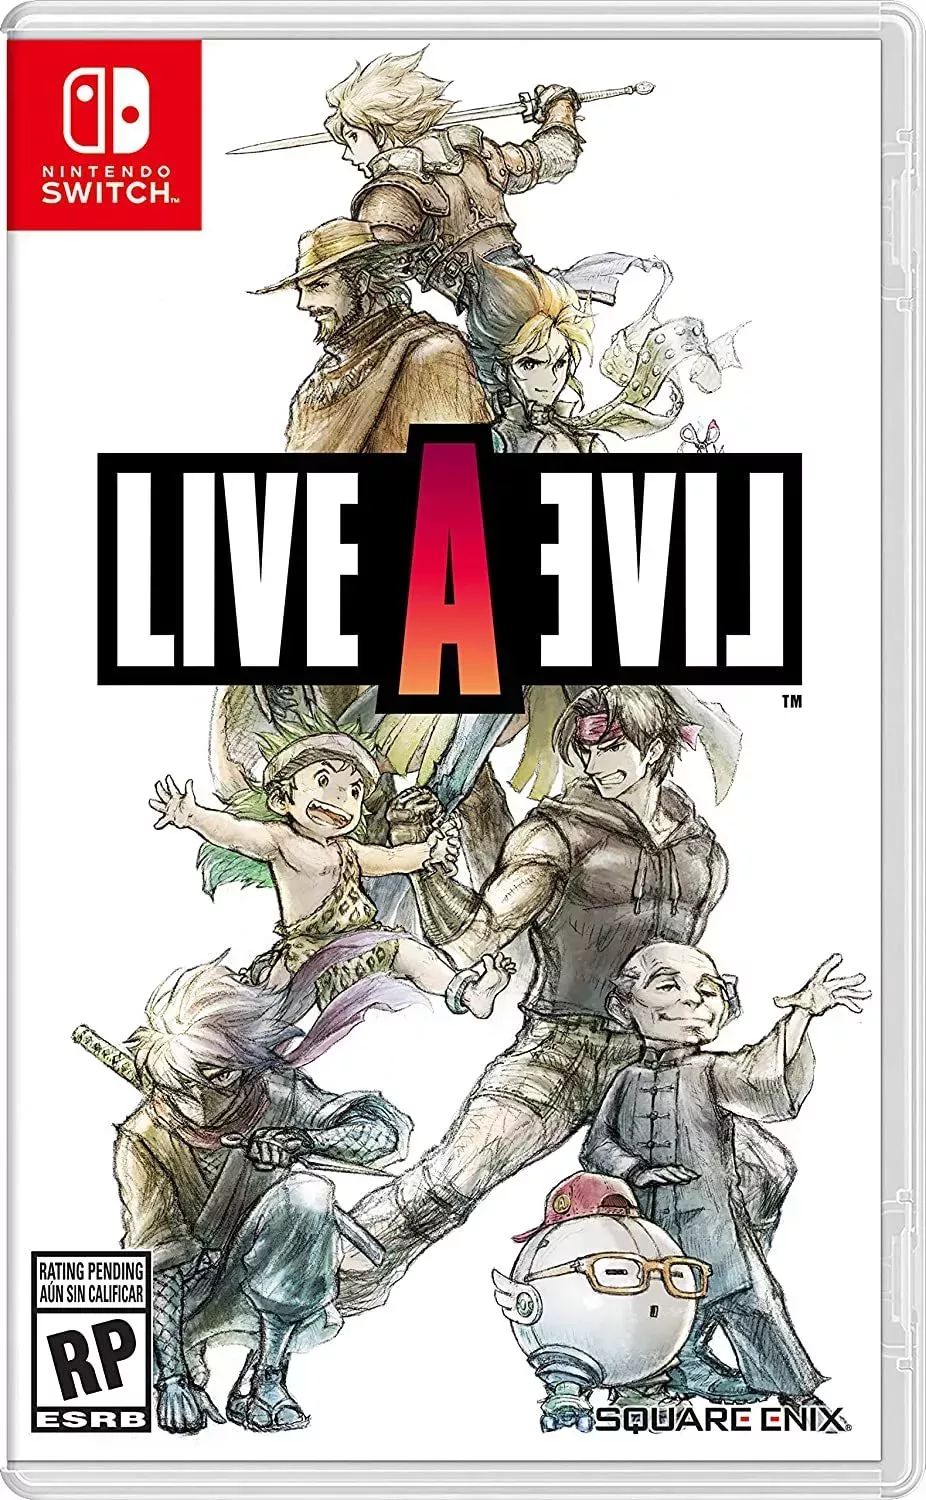 The Cast on the Nintendo Switch Cover of Live A Live